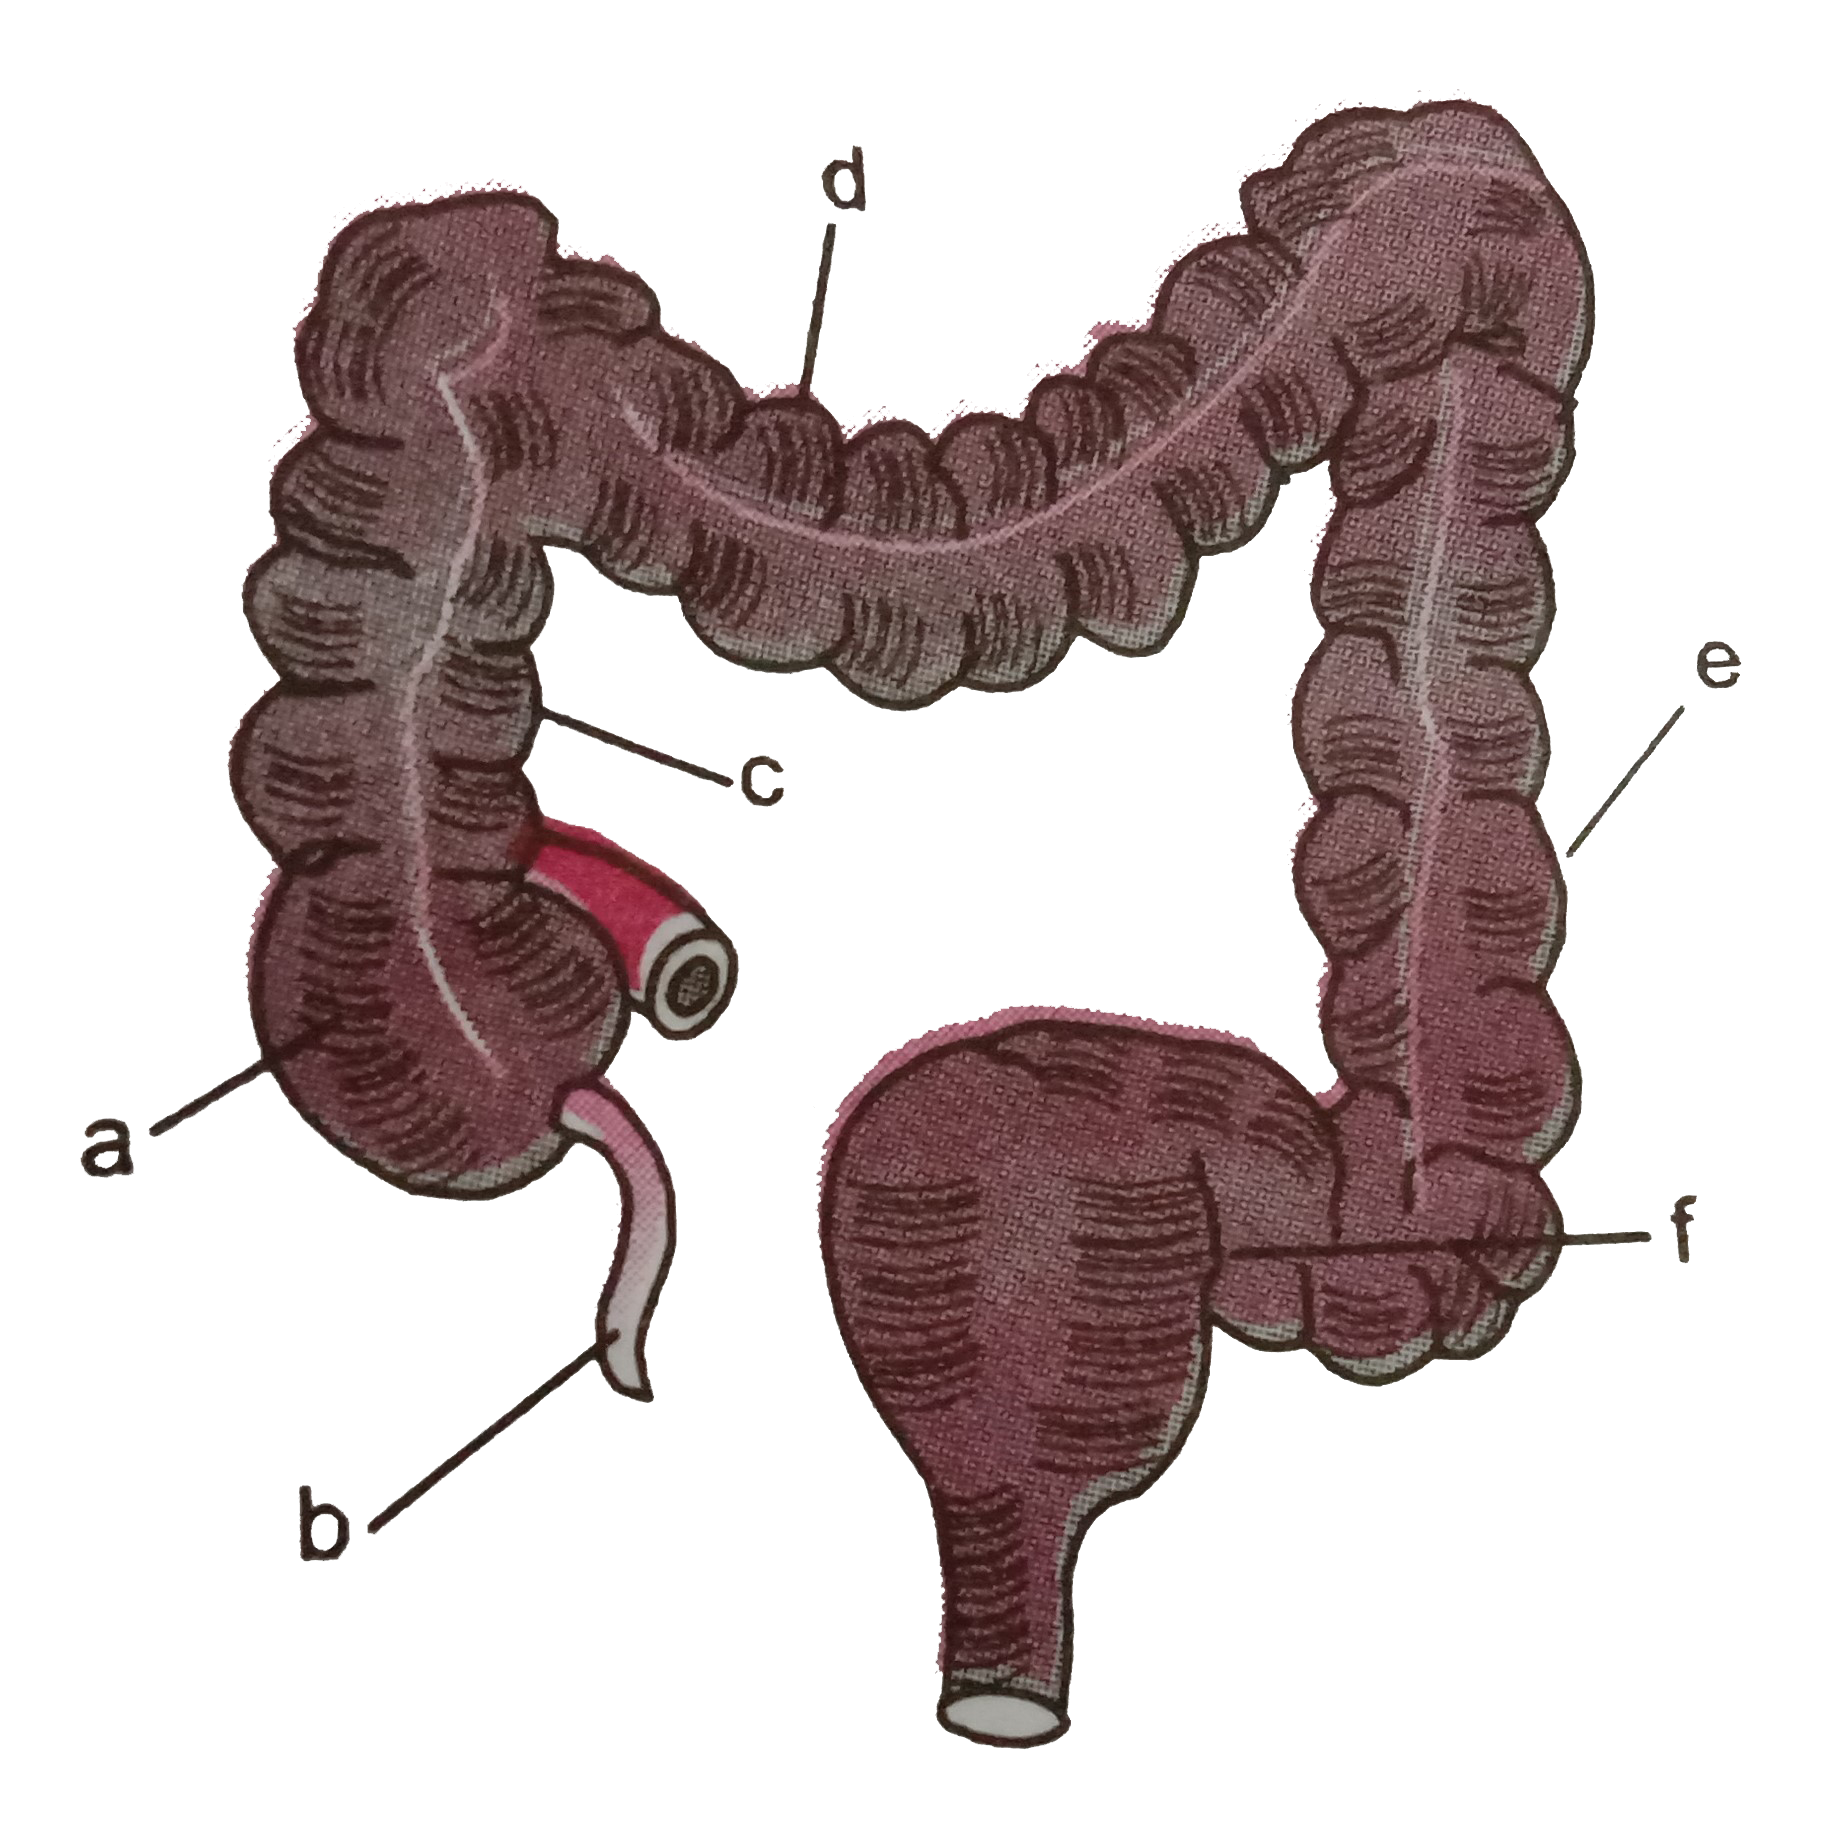 Diagram of large intestine is given here Idenstify tha parts a,b,c,d,e and f